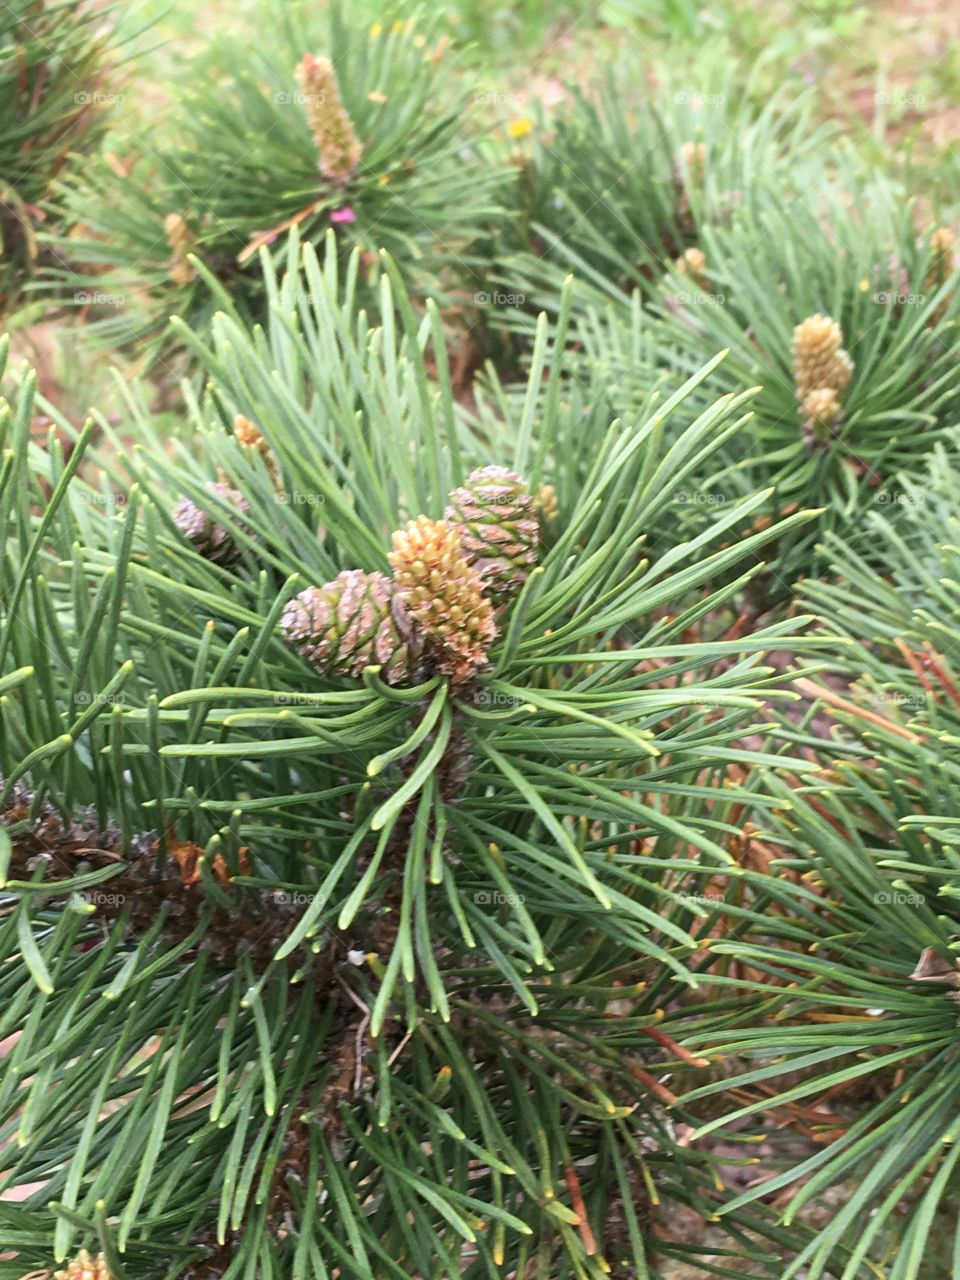 Cutest little pine tree with pine cones